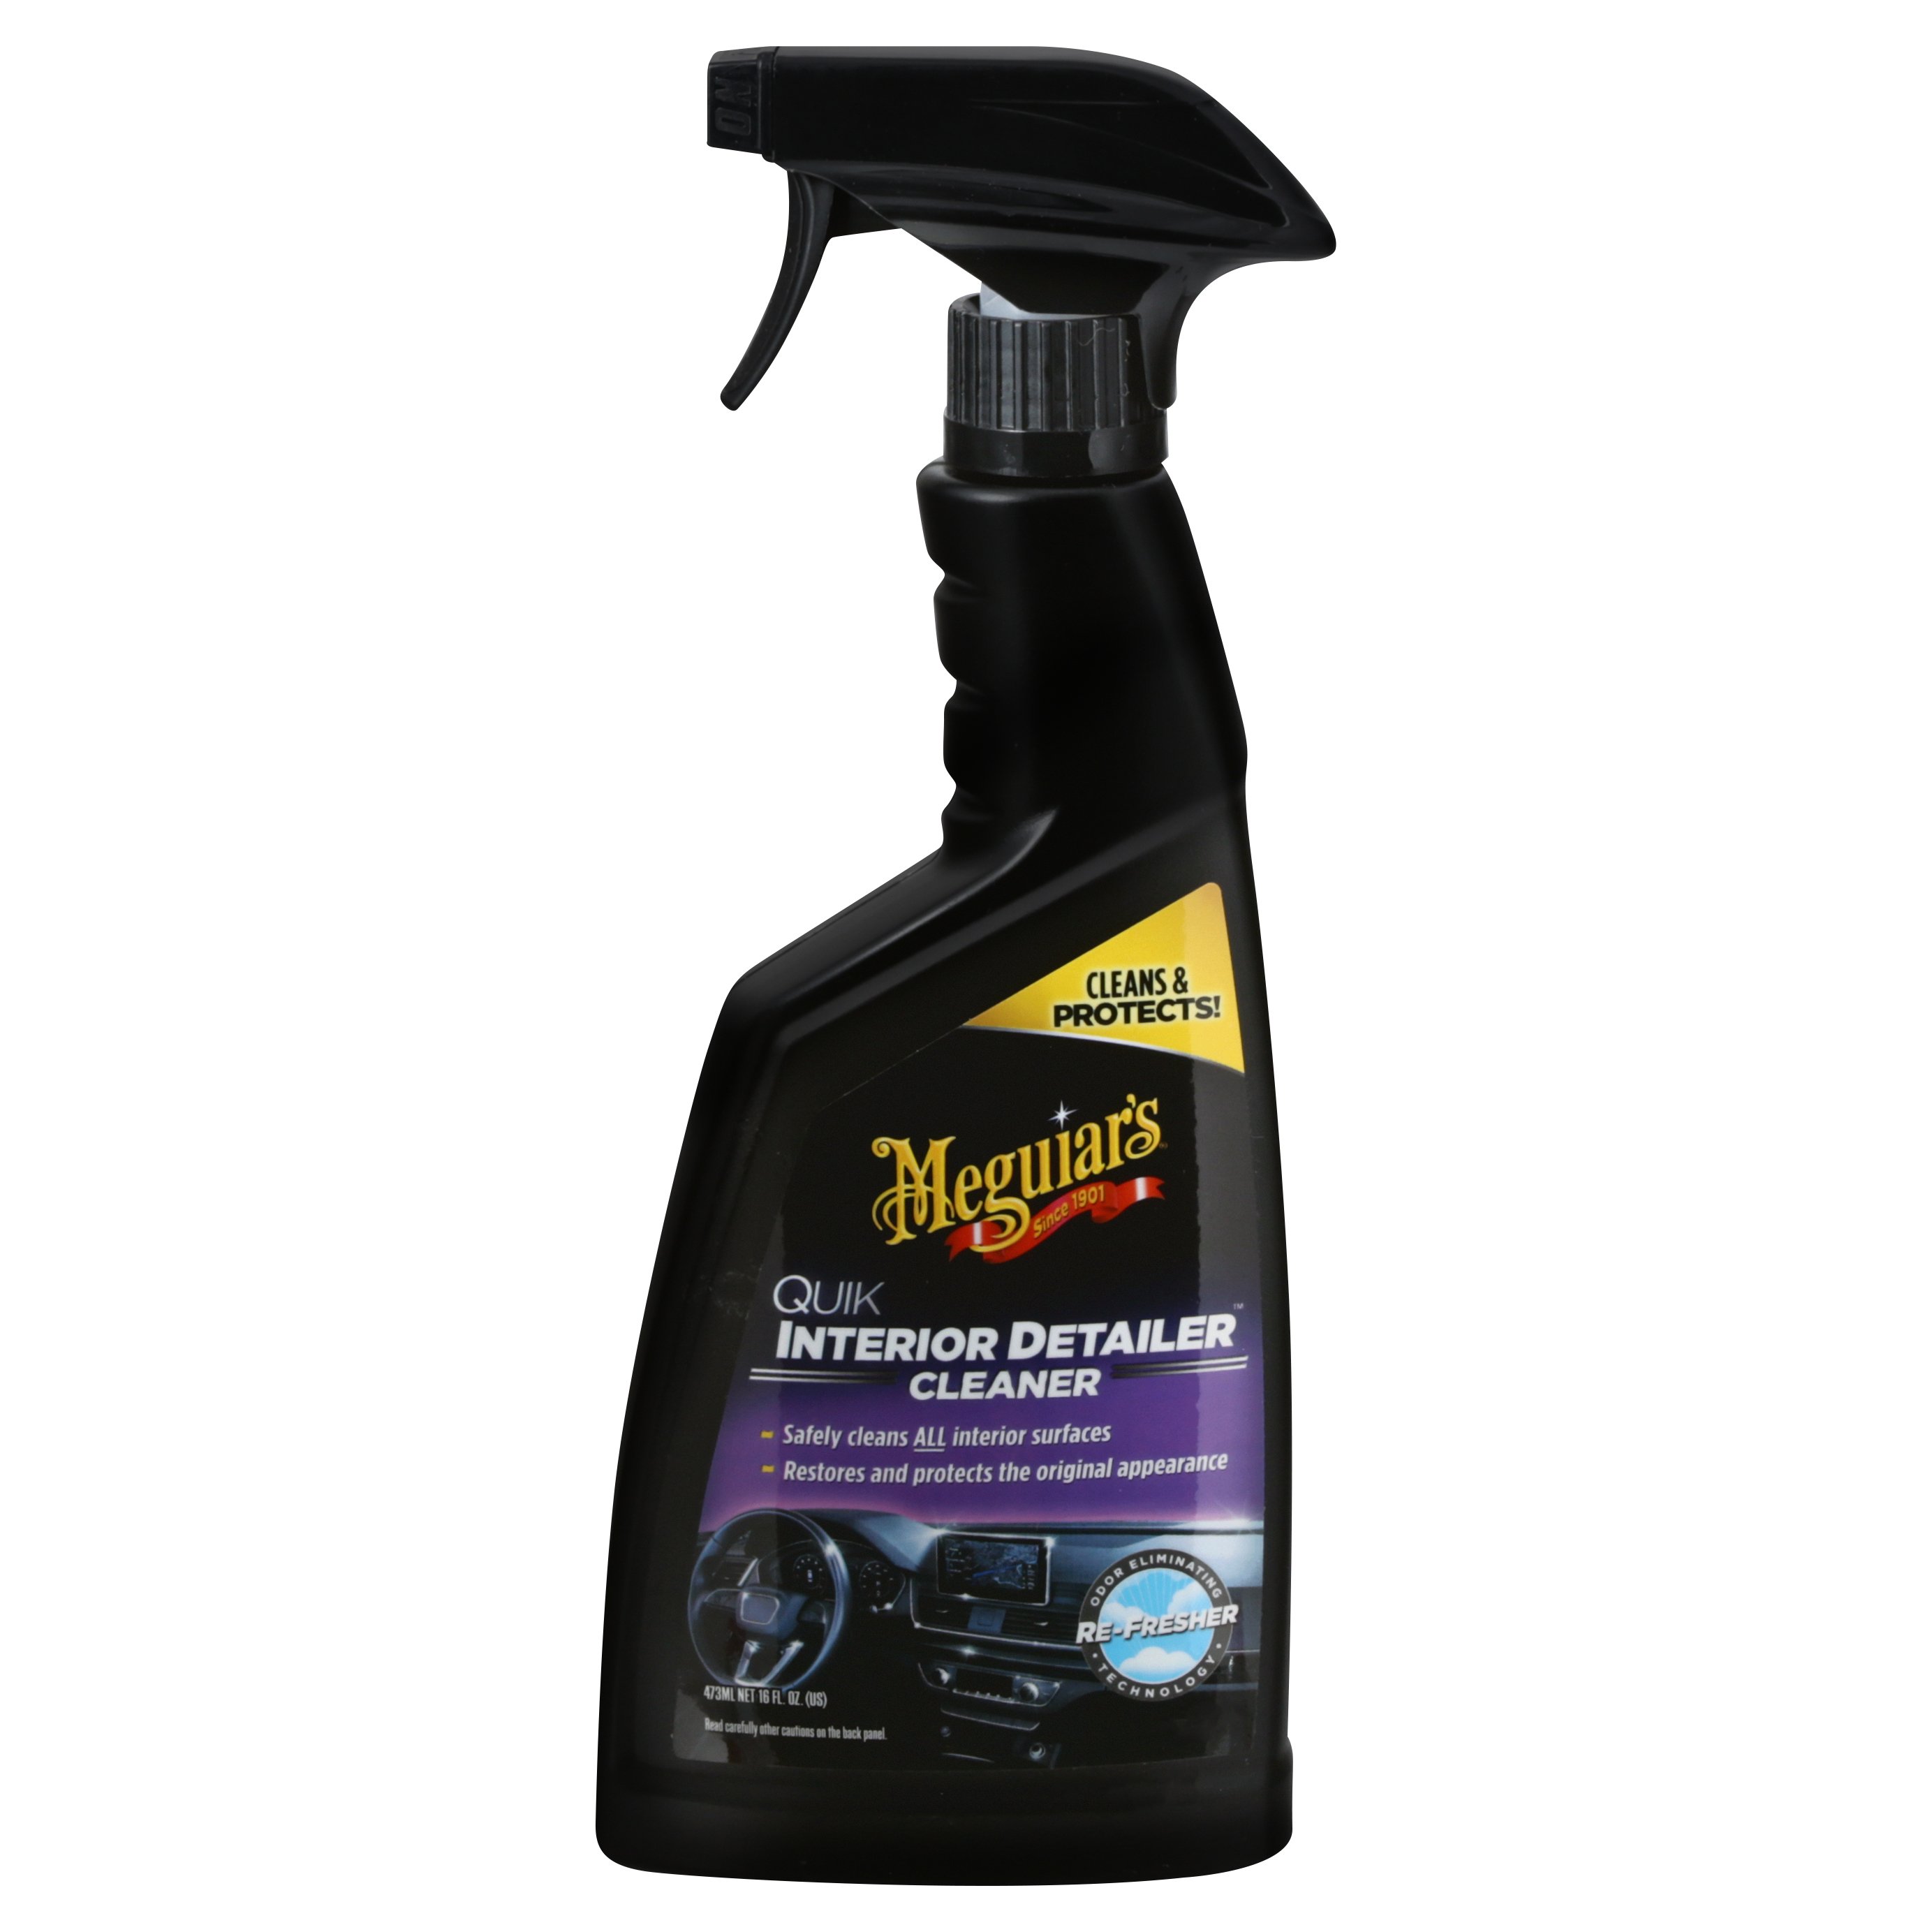 Chemical Guys InnerClean Interior Quick Detailer & Protectant Car Wipes